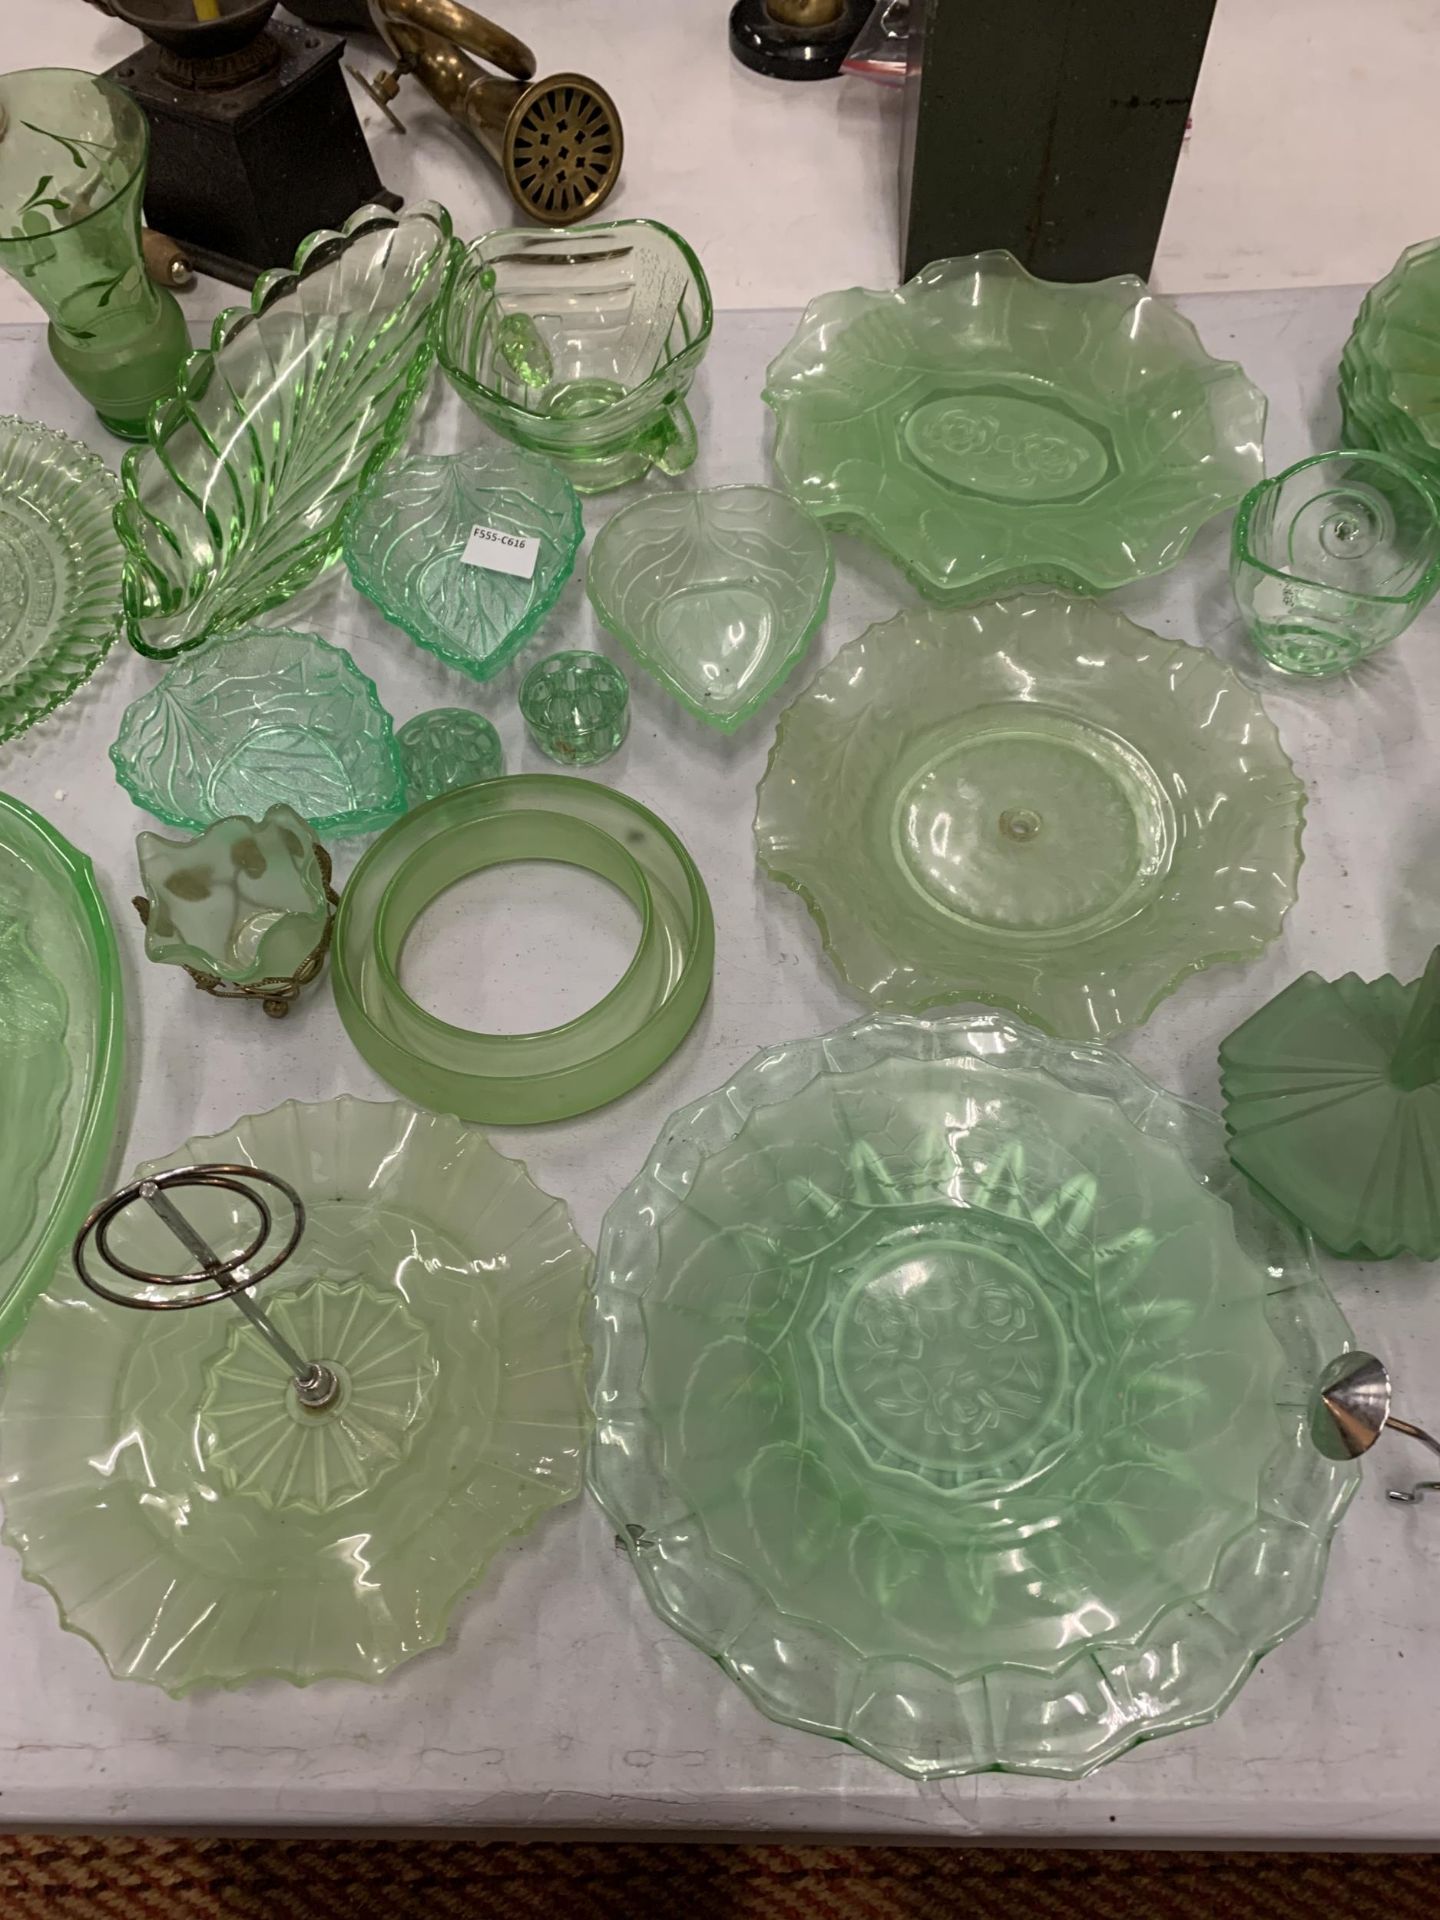 A LARGE AMOUNT OF GREEN GLASSWARE TO INCLUDE LEAF SHAPED BOWLS, PATTERNED PLATES, BOWLS, PLATES, ETC - Image 3 of 4